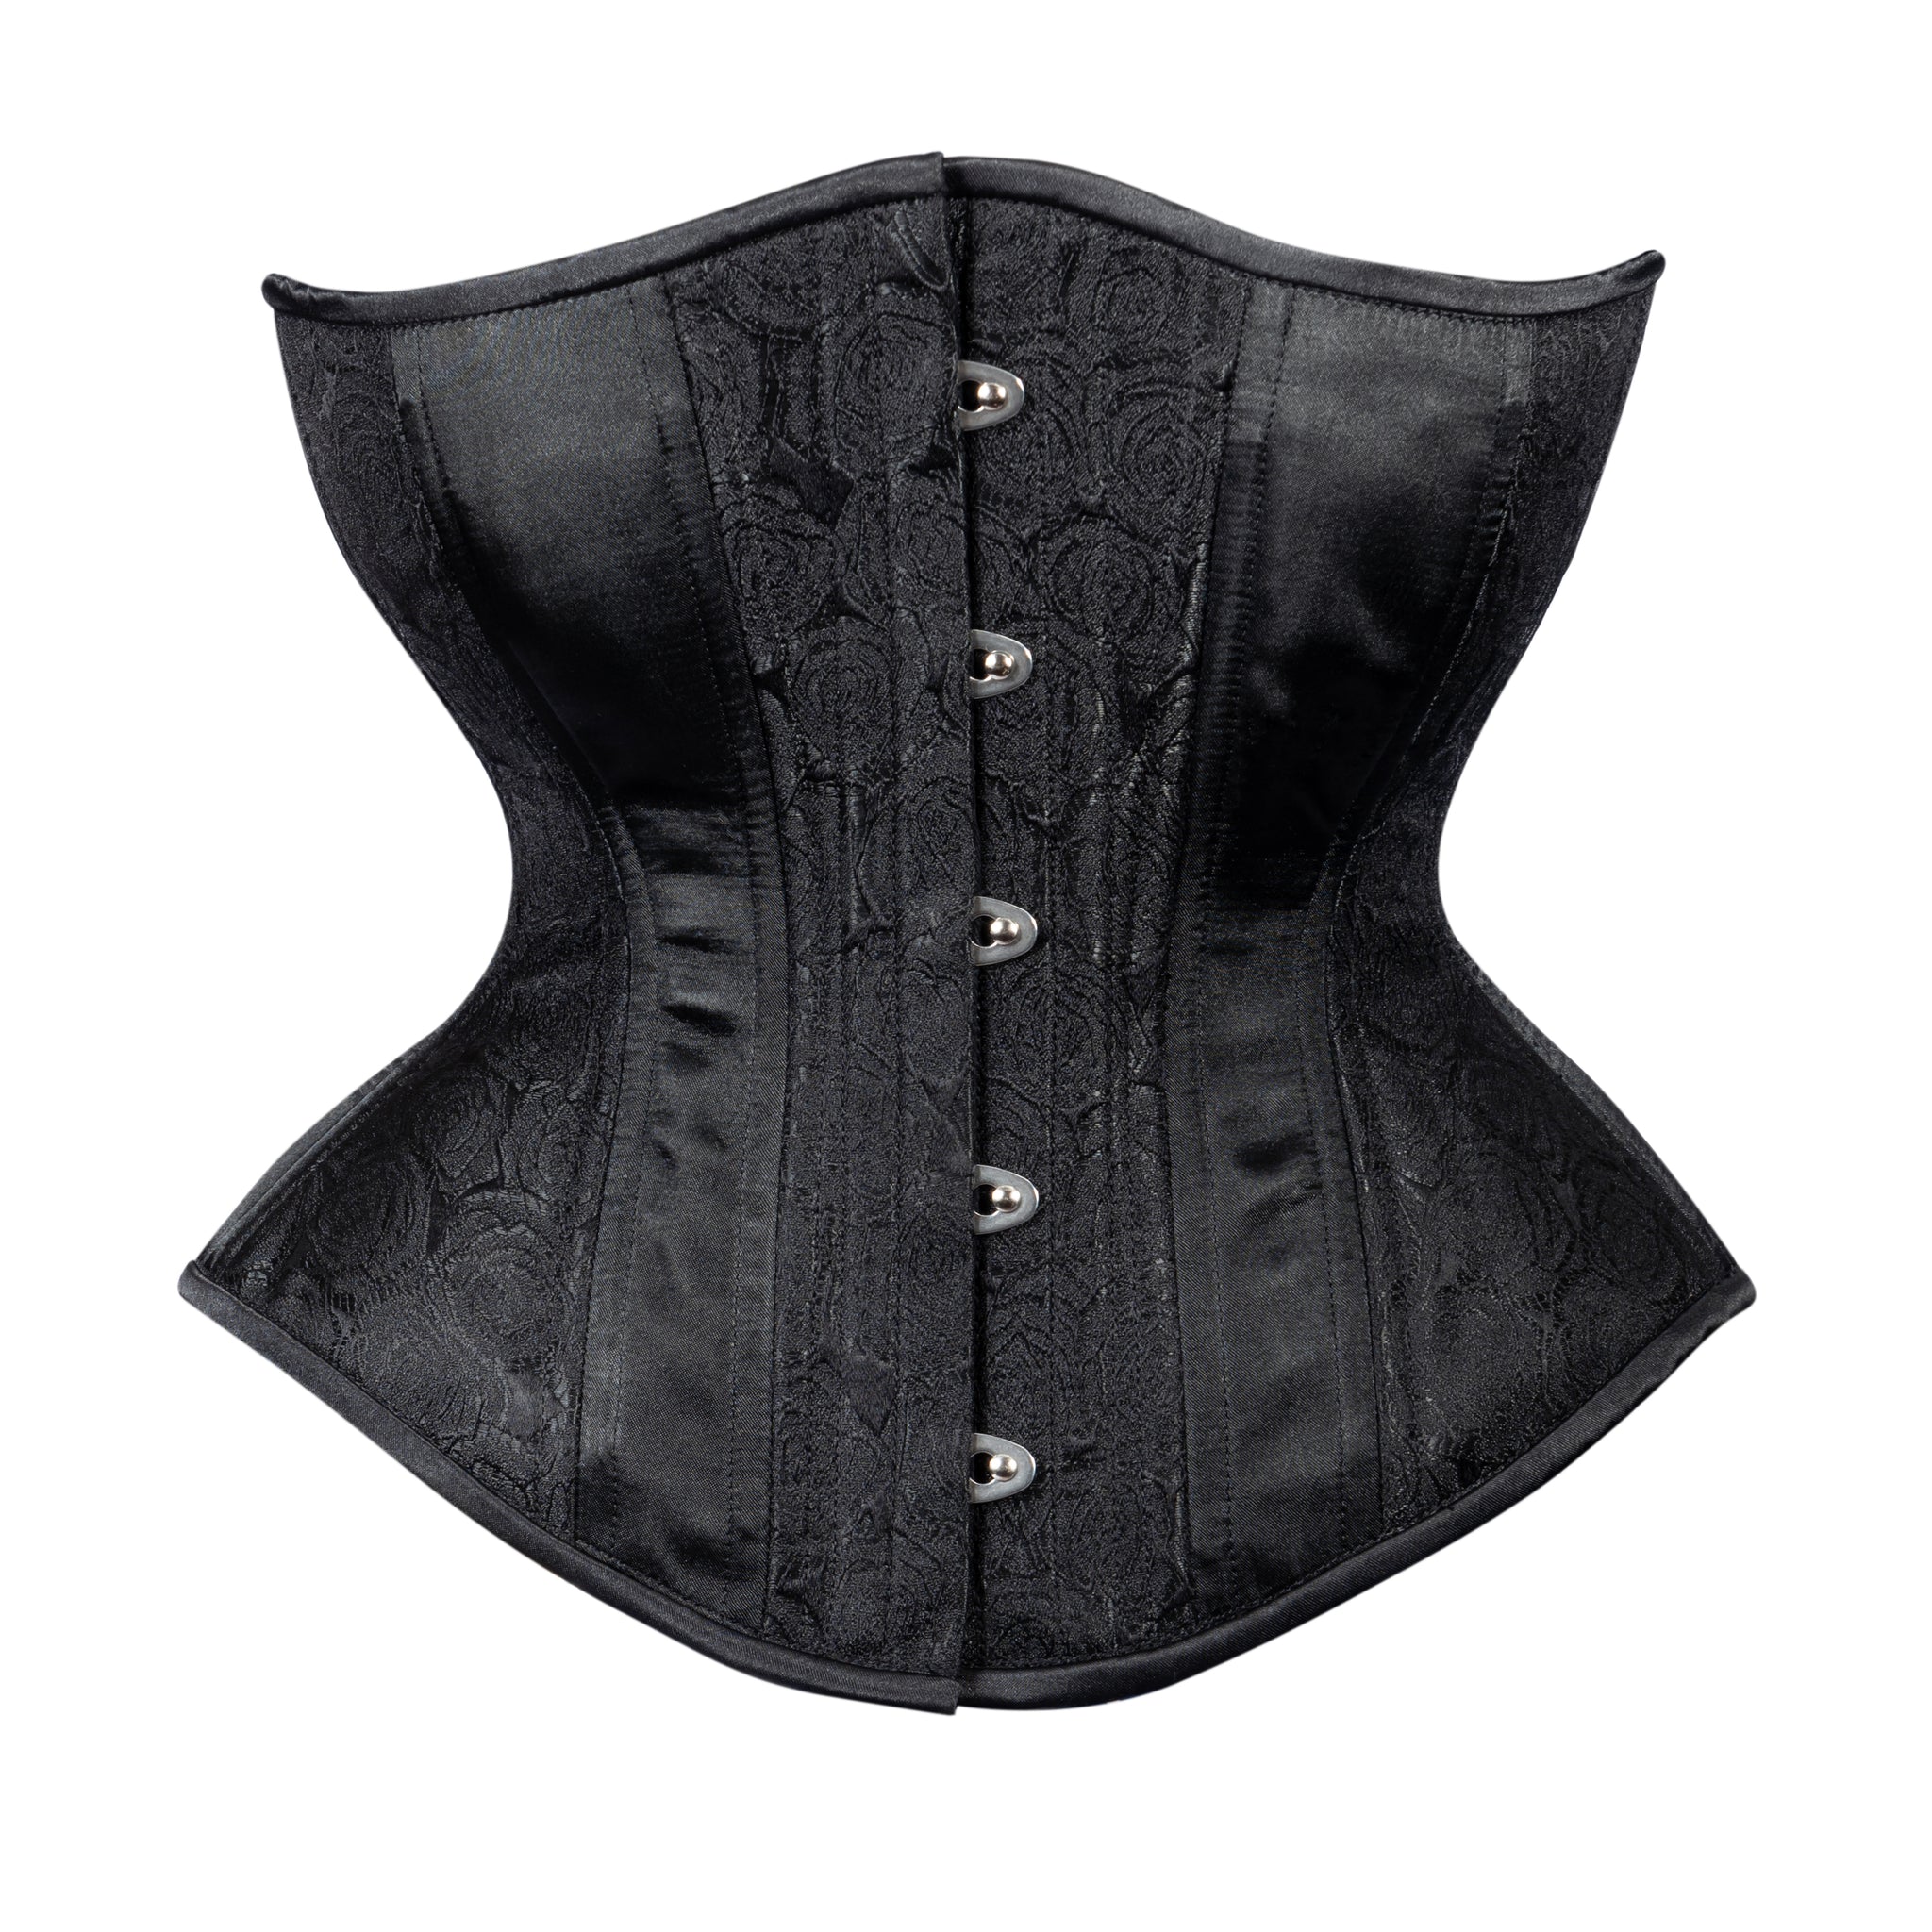 Black Floral Brocade Hourglass Corset – Timeless-Trends